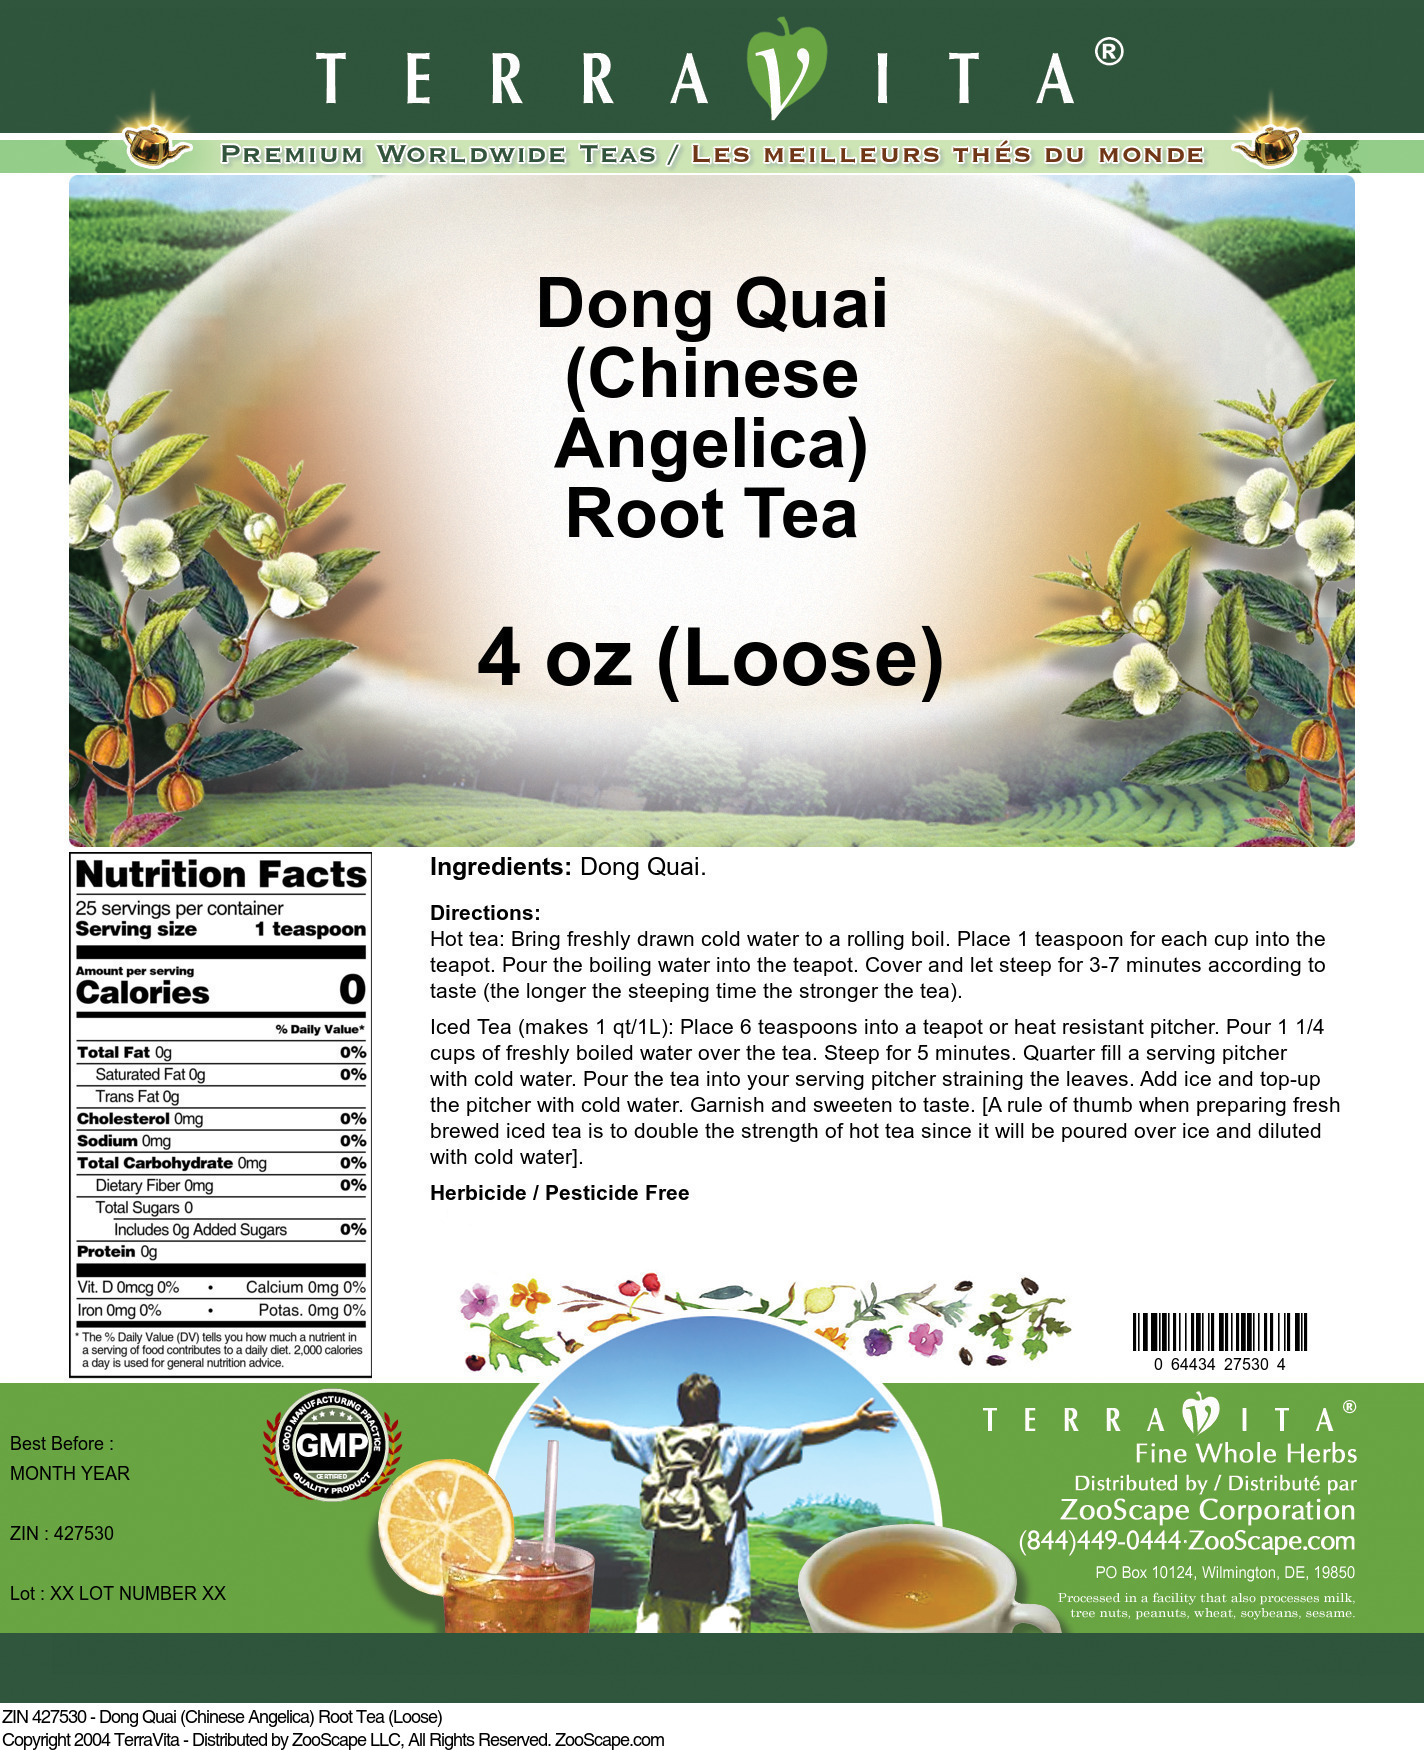 Dong Quai (Chinese Angelica) Root Tea (Loose) - Label